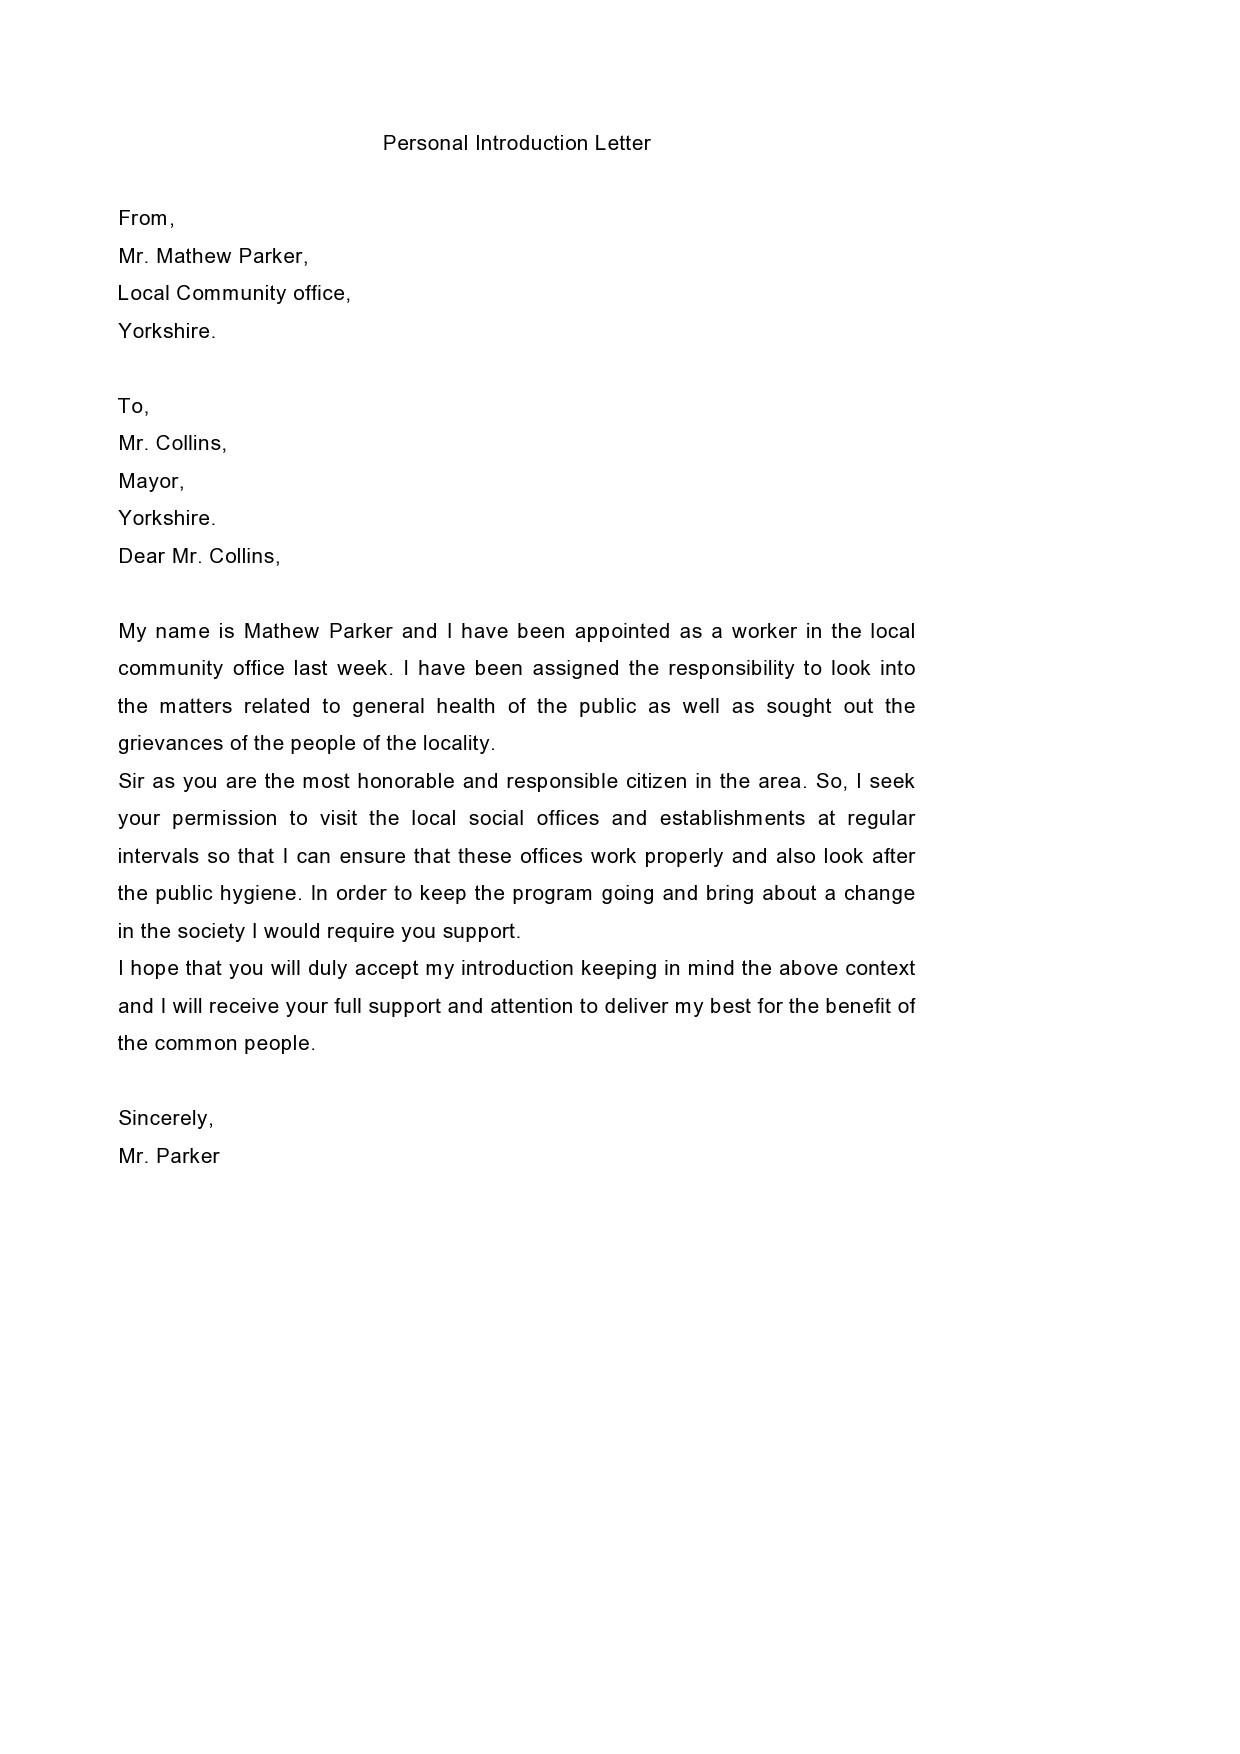 47 Best Personal Letter Format Templates [100 Free] ᐅ